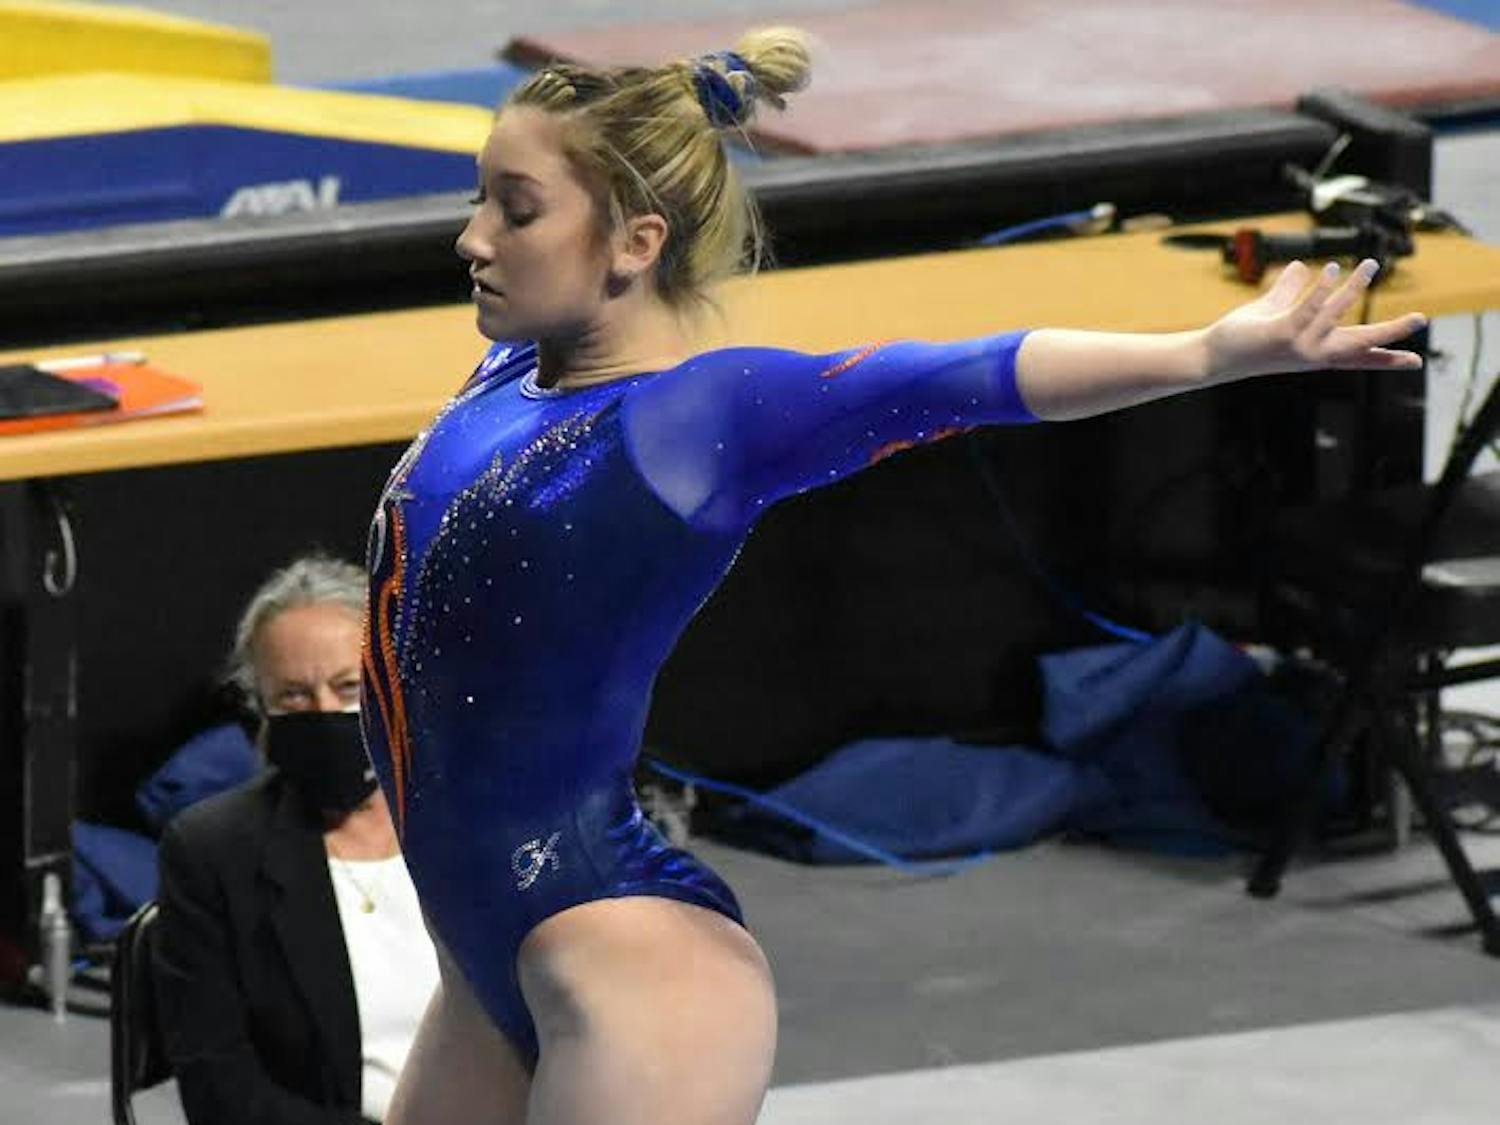 Payton Richards almost had to quit gymnastics because of a tumor doctors found when she was 12. Years later, she’s become one of the most recognizable faces of the gymnastics team. 